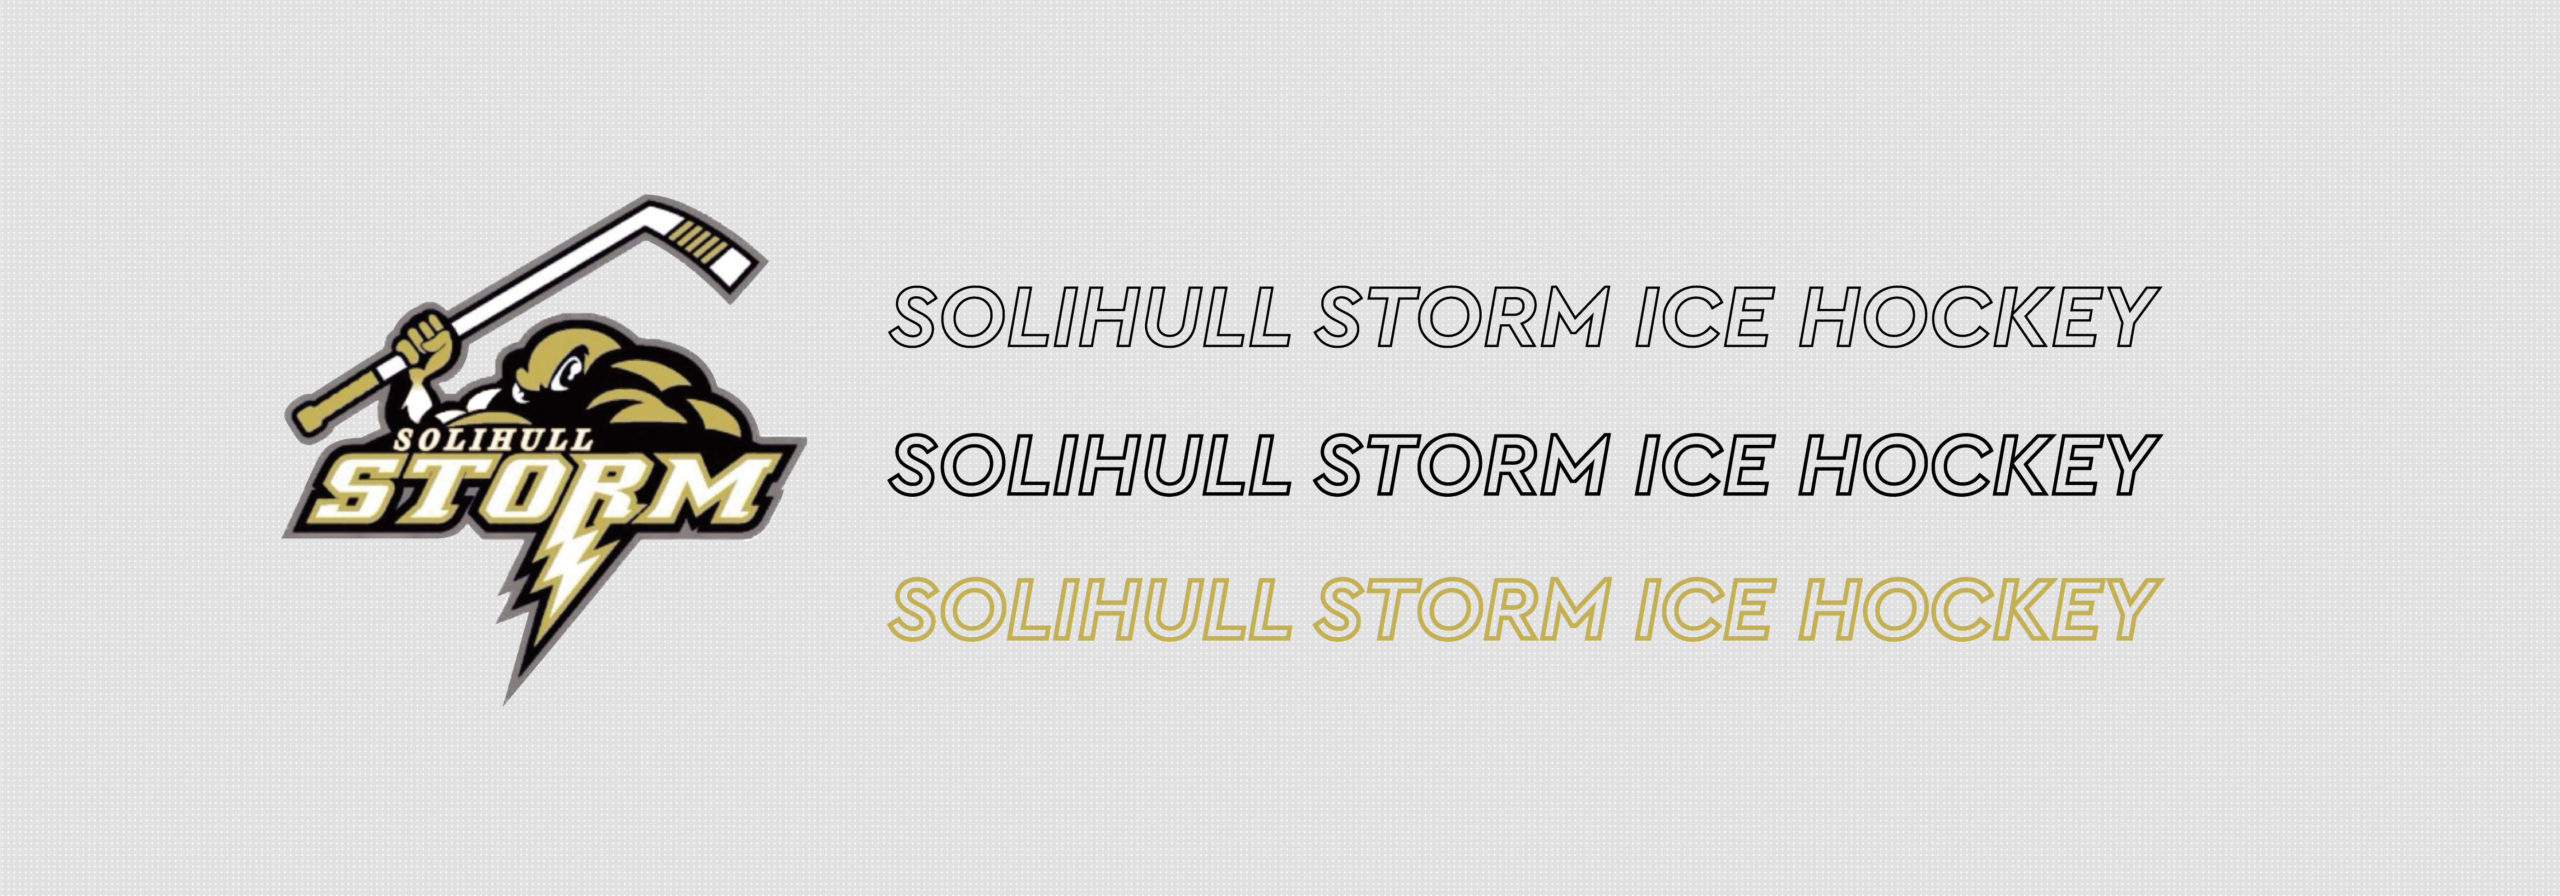 Solihull Storm Ice Hockey Game Jersey